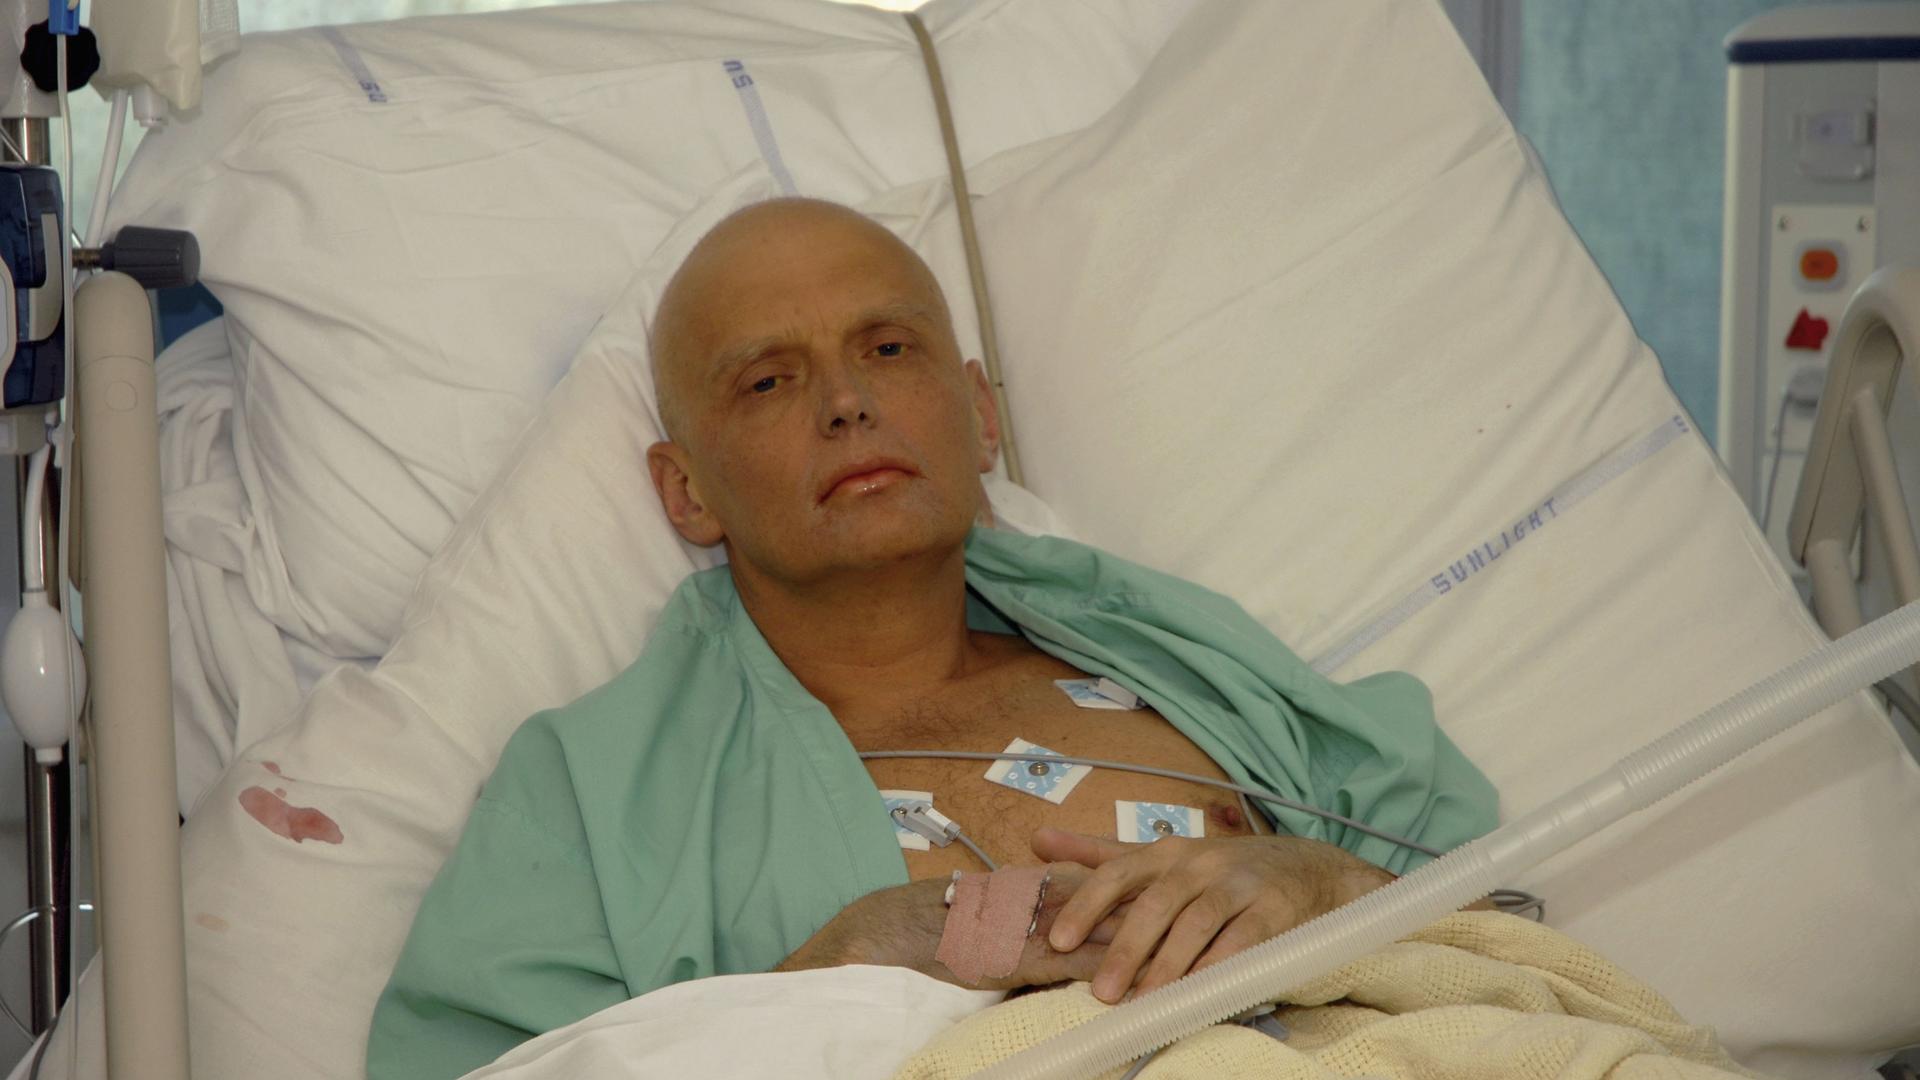 Alexander Litvinenko in the hospital shortly before his death in 2006.